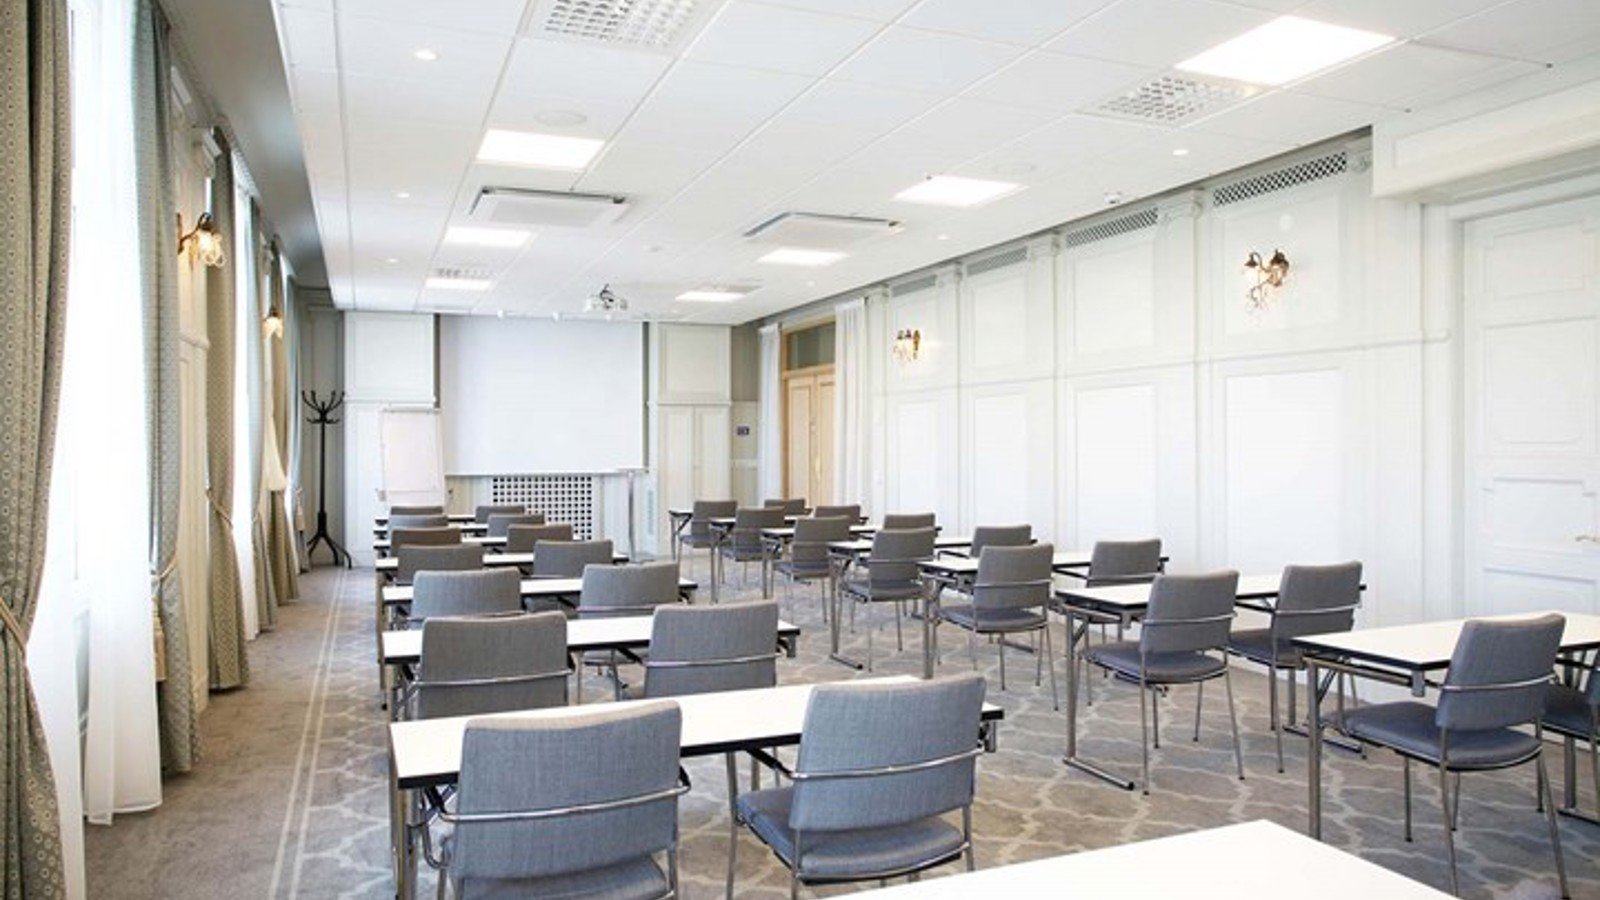 Conference room with lined up gray chairs, white walls and large windows